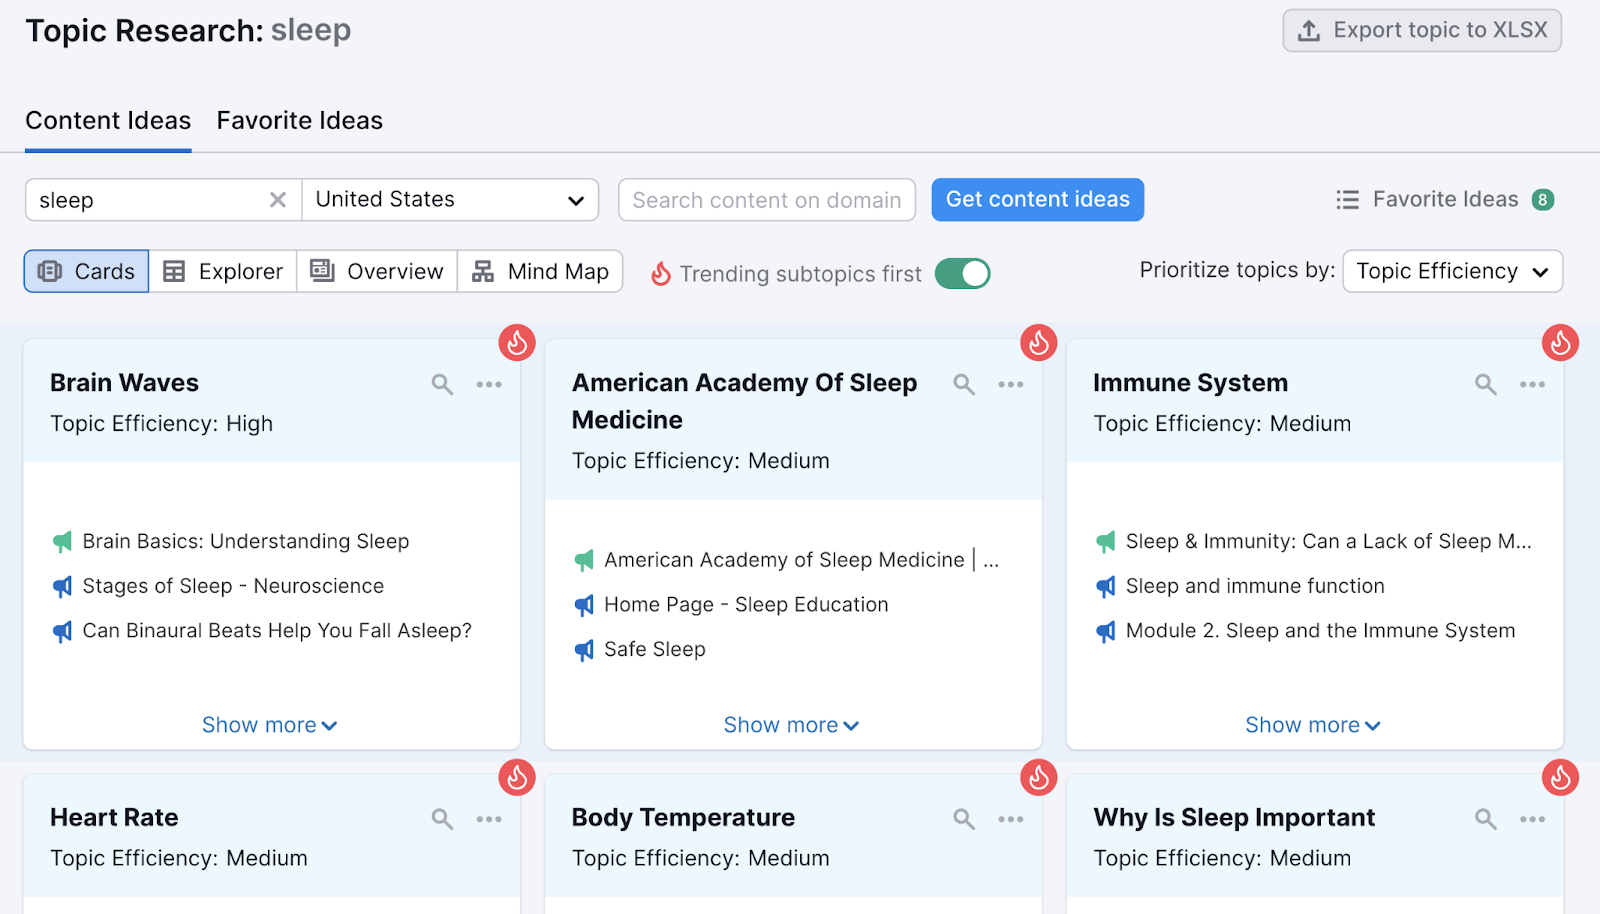 "Content Ideas" dashboard for "sleep" successful  Topic Research tool